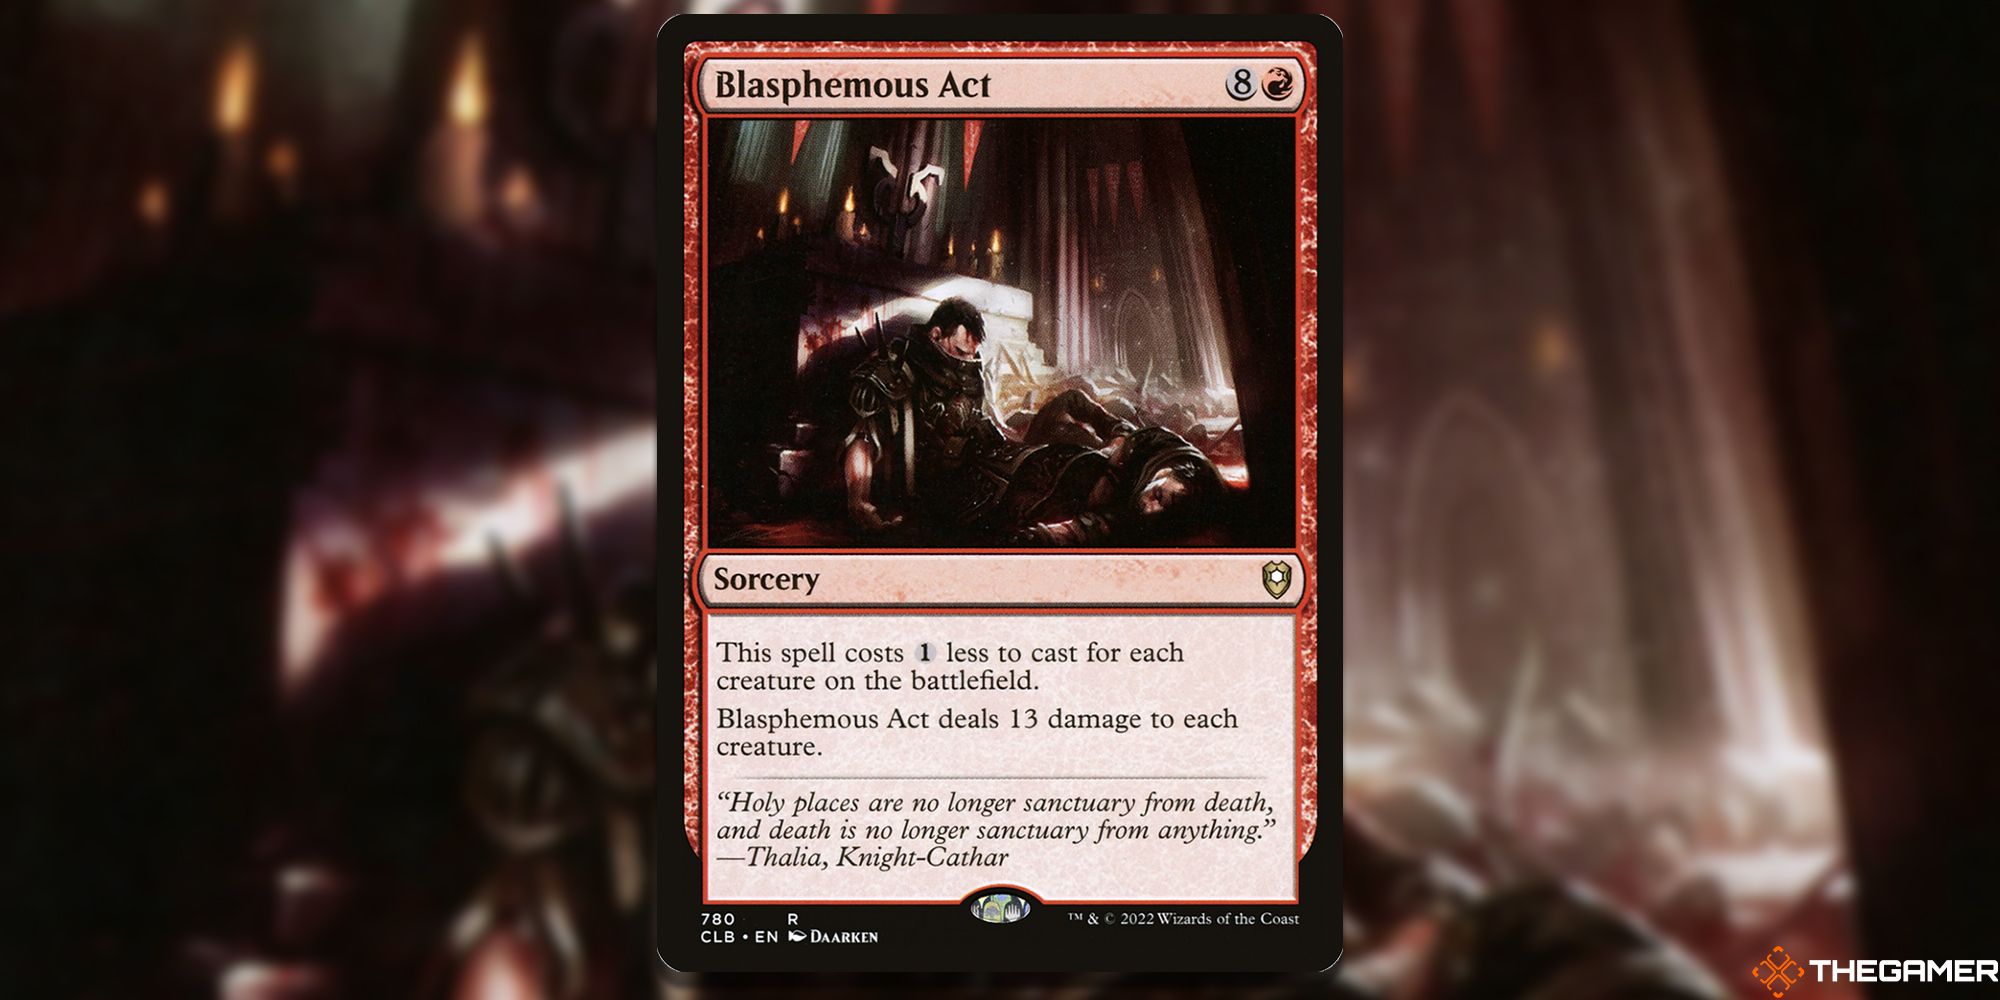 Image of the Blasphemous Act card in Magic: The Gathering, with art by Daarken